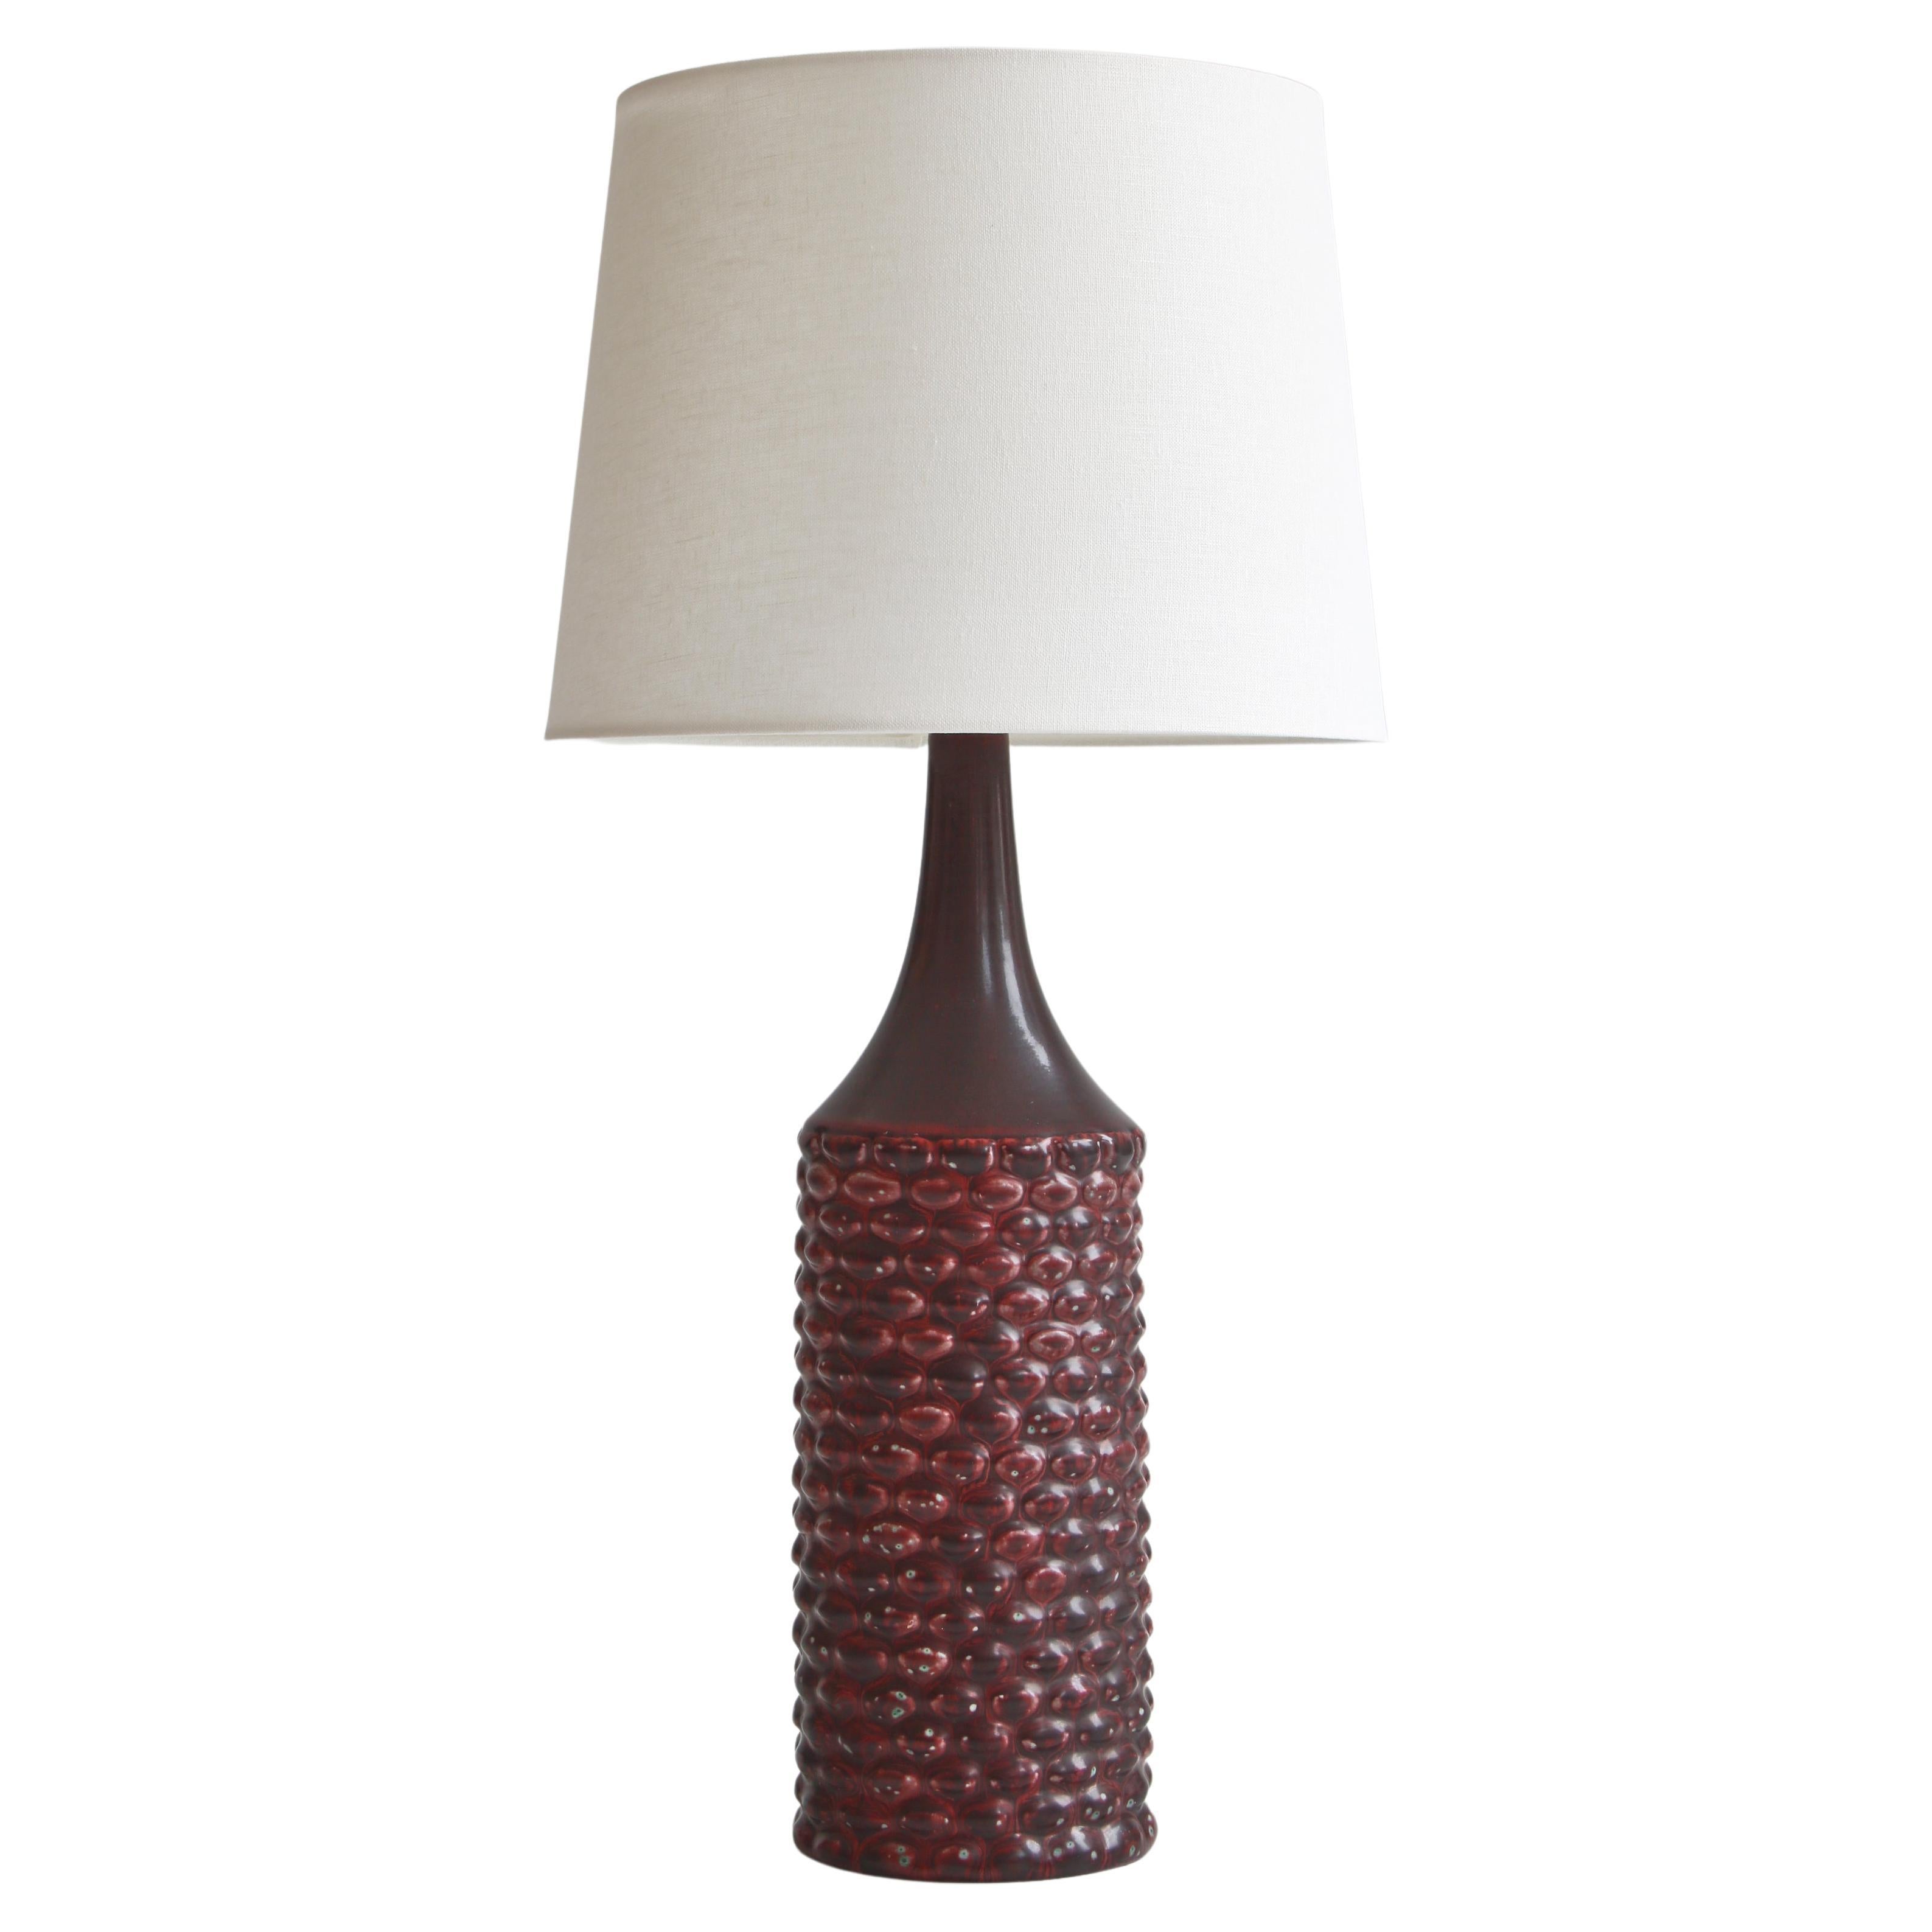 Axel Salto Large Table Lamp in Oxblood Glaze from Royal Copenhagen, 1958 For Sale